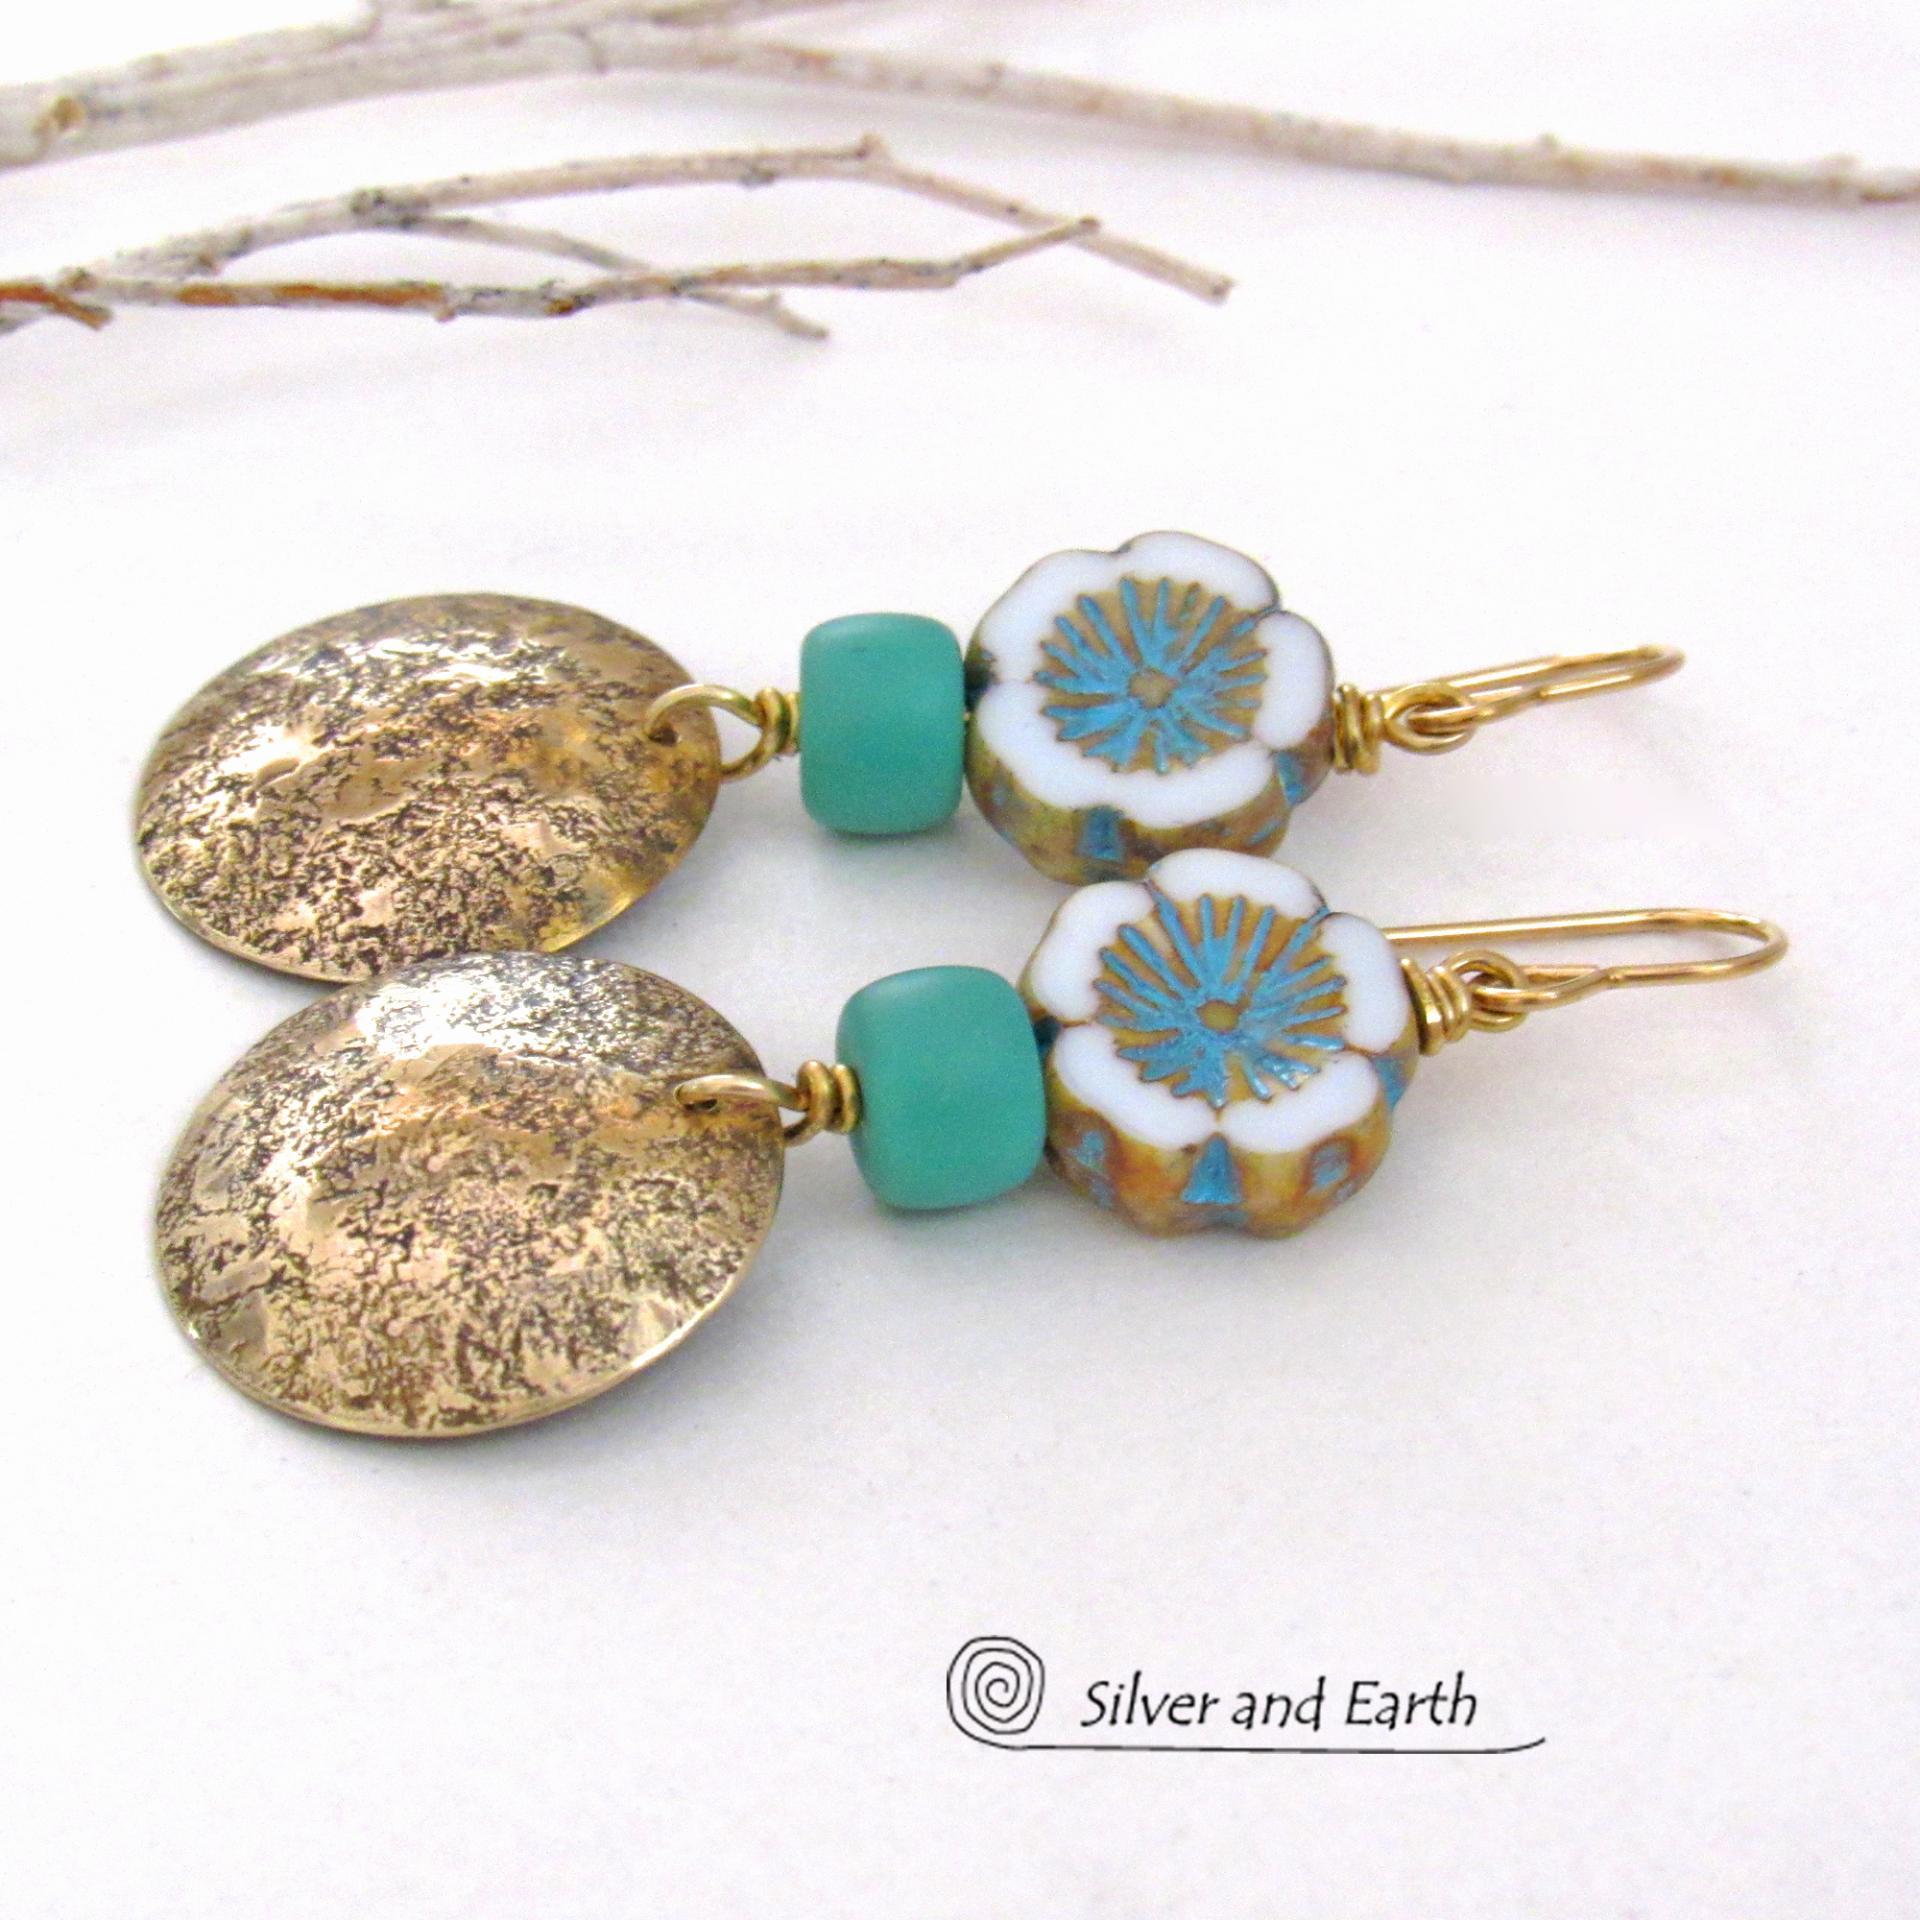 White, Blue and Gold Glass Flower Earrings with Brass Dangles - Unique Nature Jewelry Gifts for Women